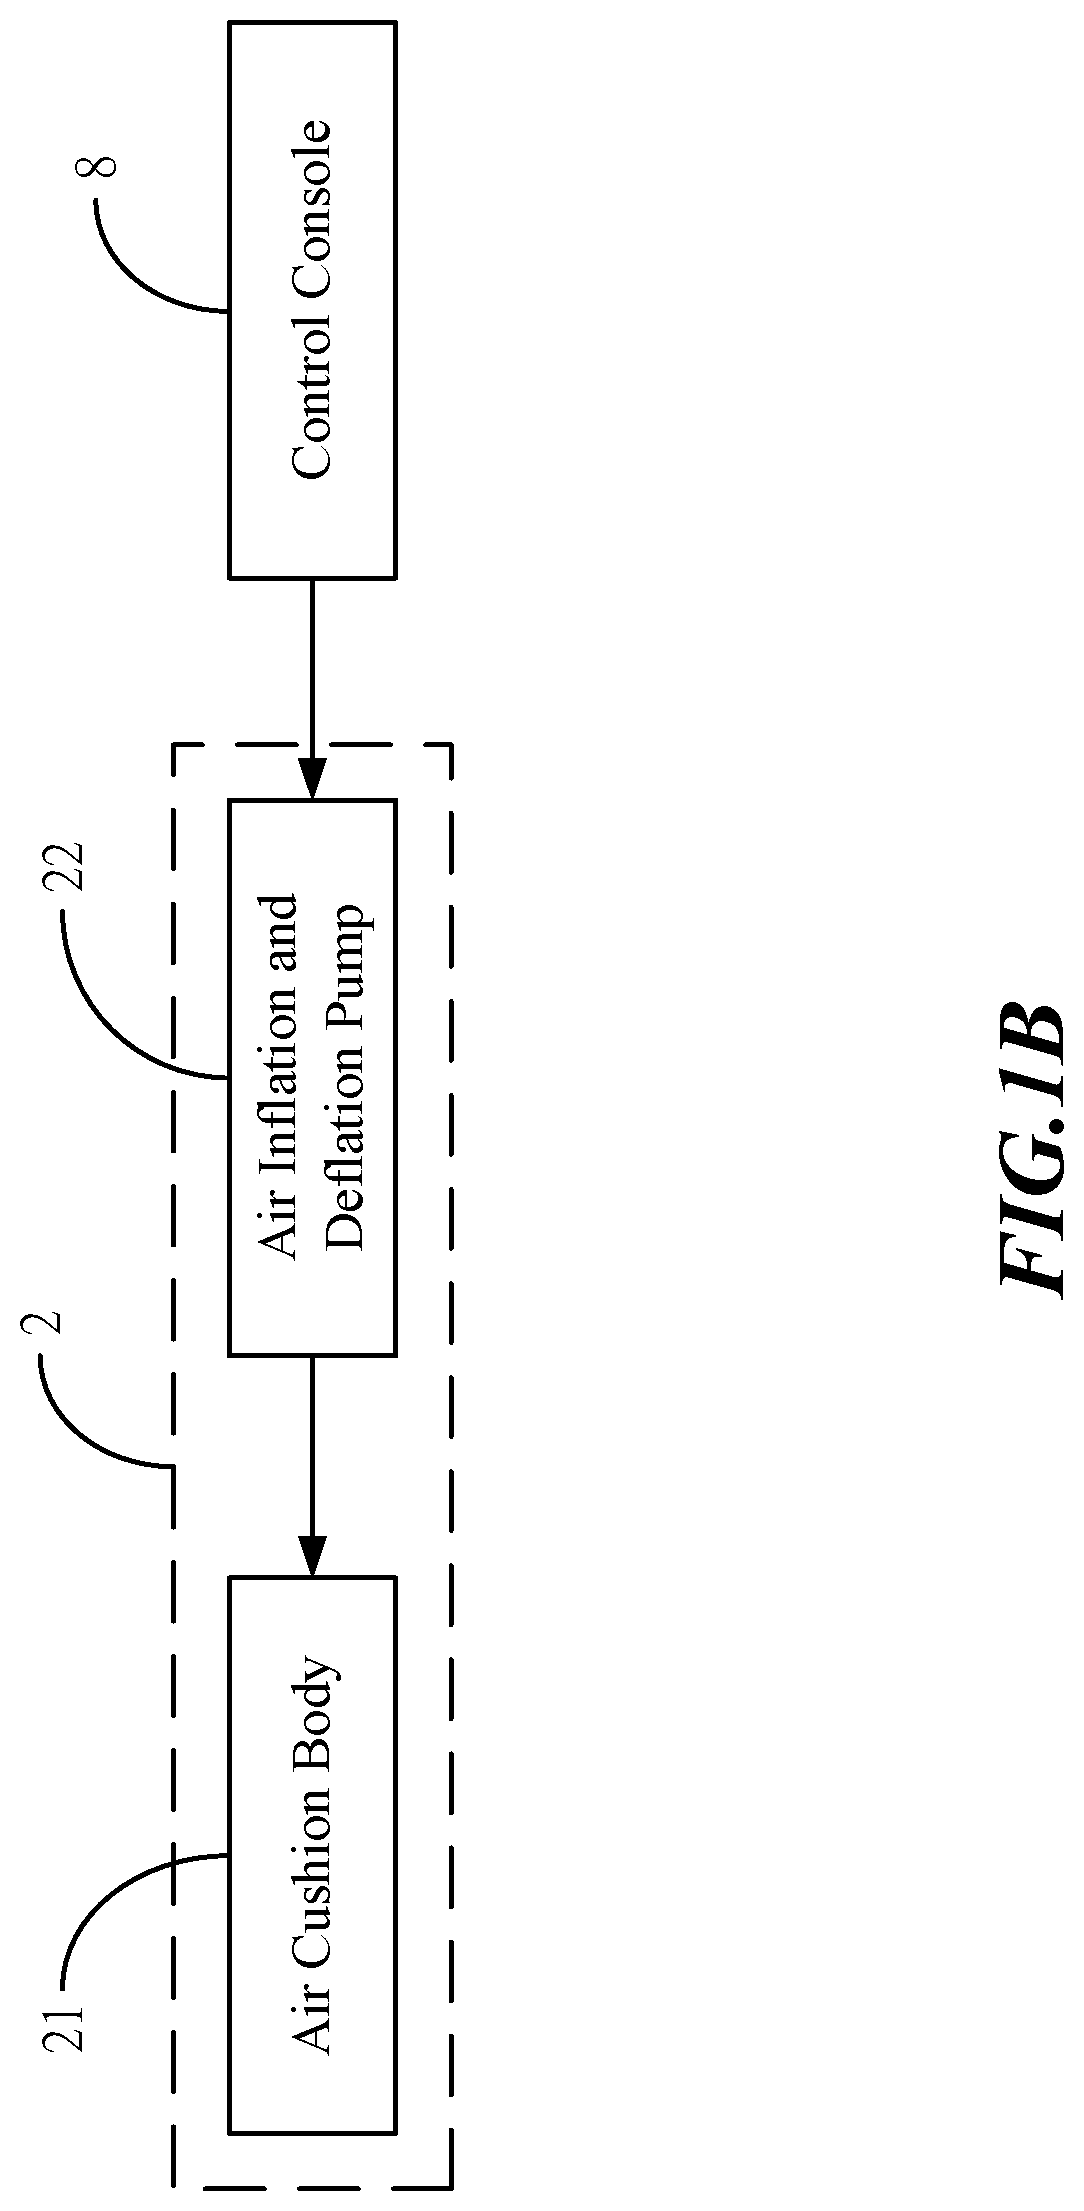 Wireless automatic charging system for electric vehicles